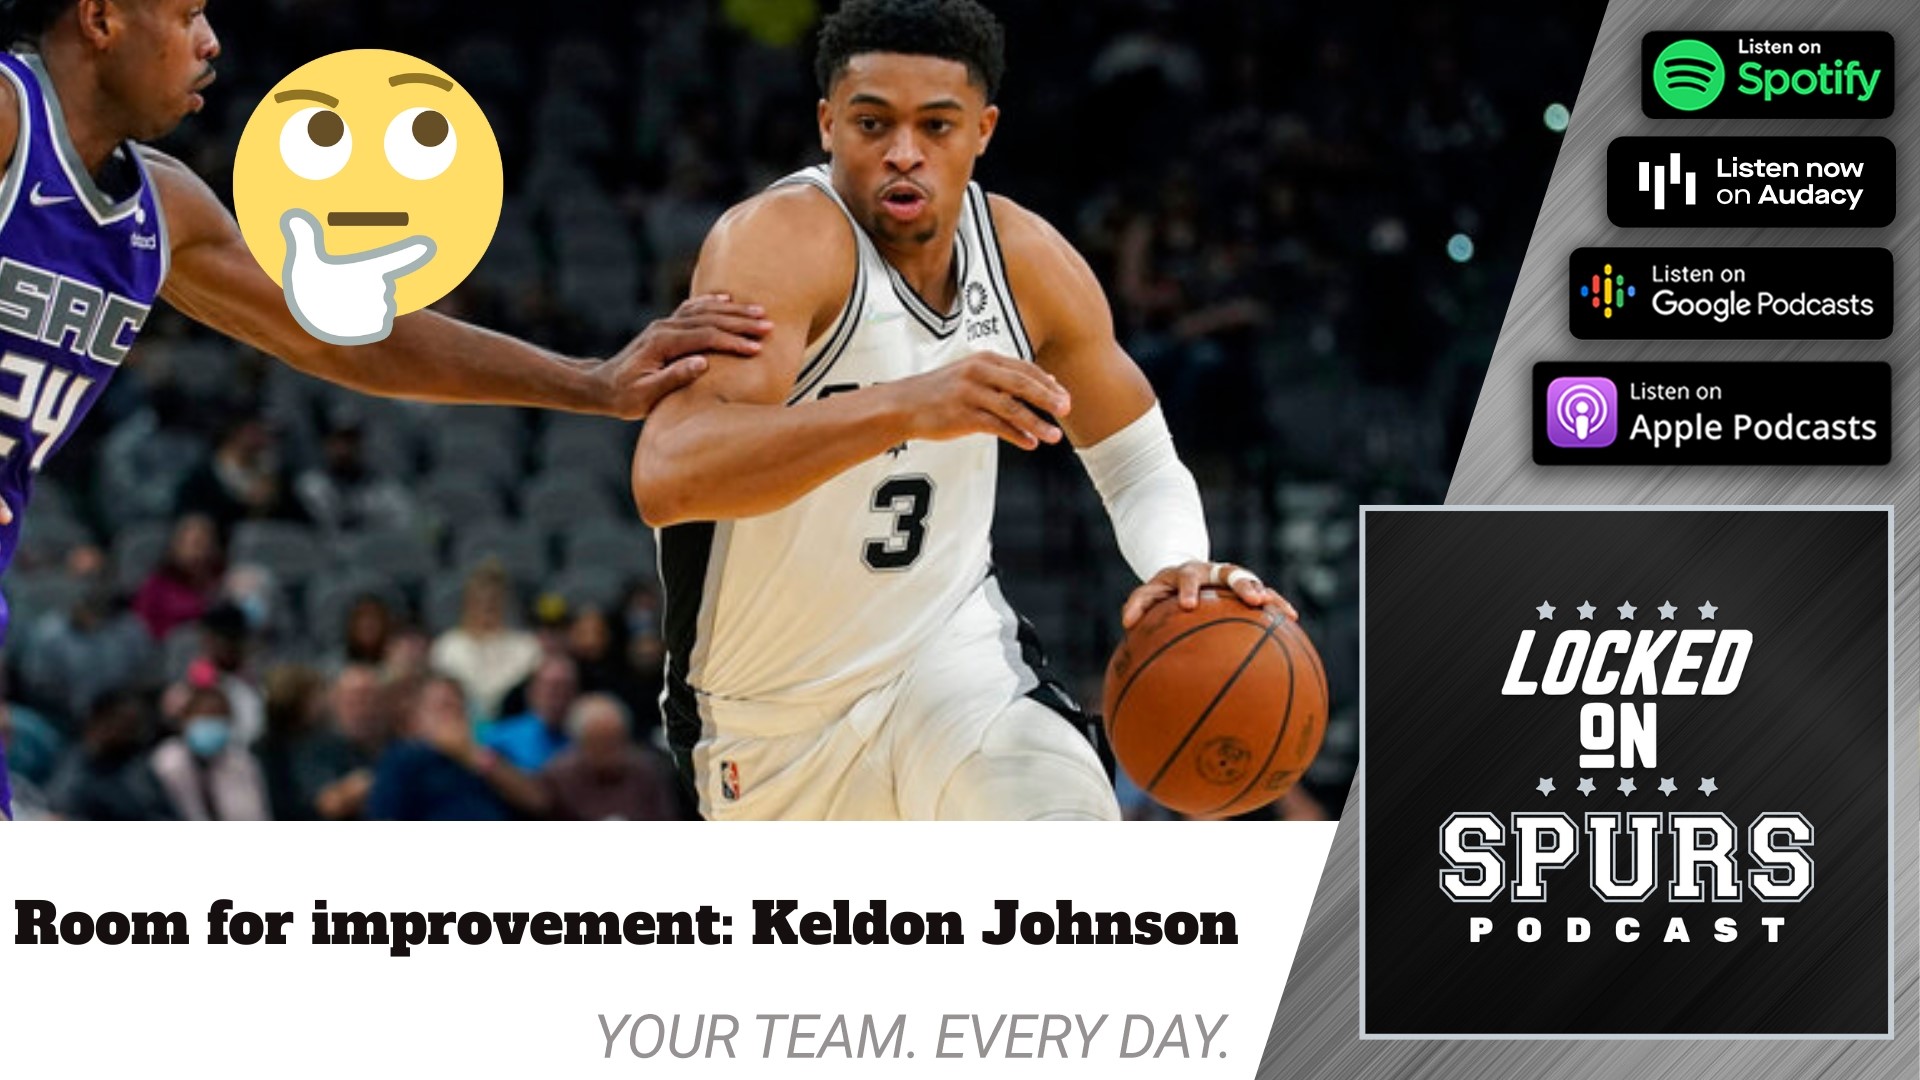 How much improvement can we expect from Johnson heading into the new season?